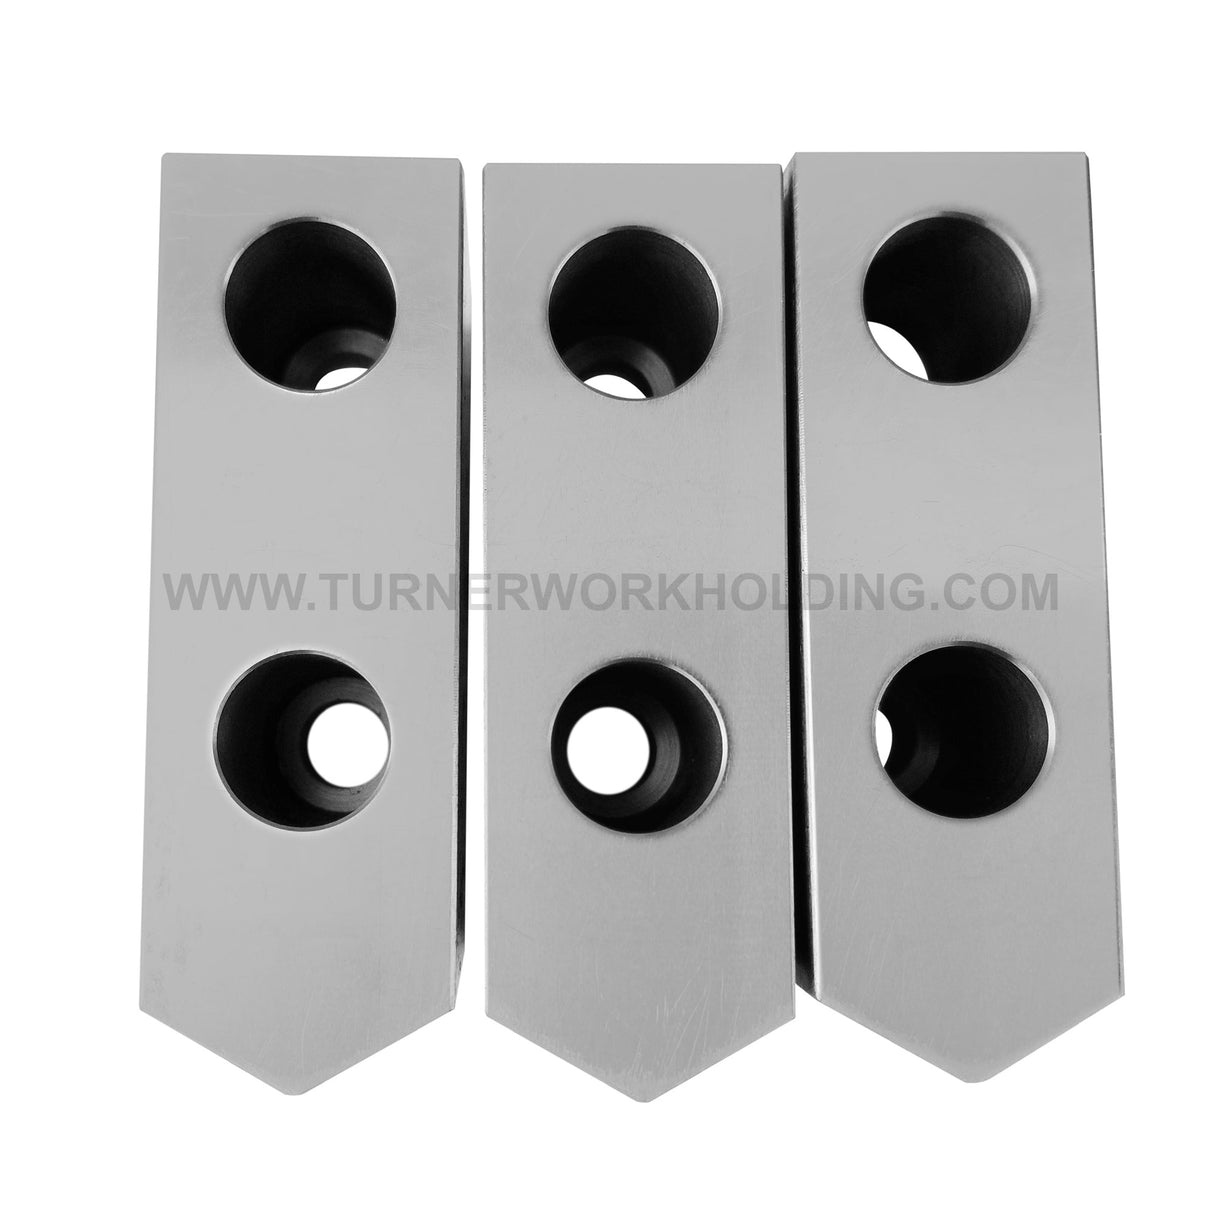 TG-10C-3.0-SP- AMERICAN STANDARD STEEL SOFT JAWS FOR TONGUE & GROOVE 10" CHUCK 3.0" HT (3 PC)